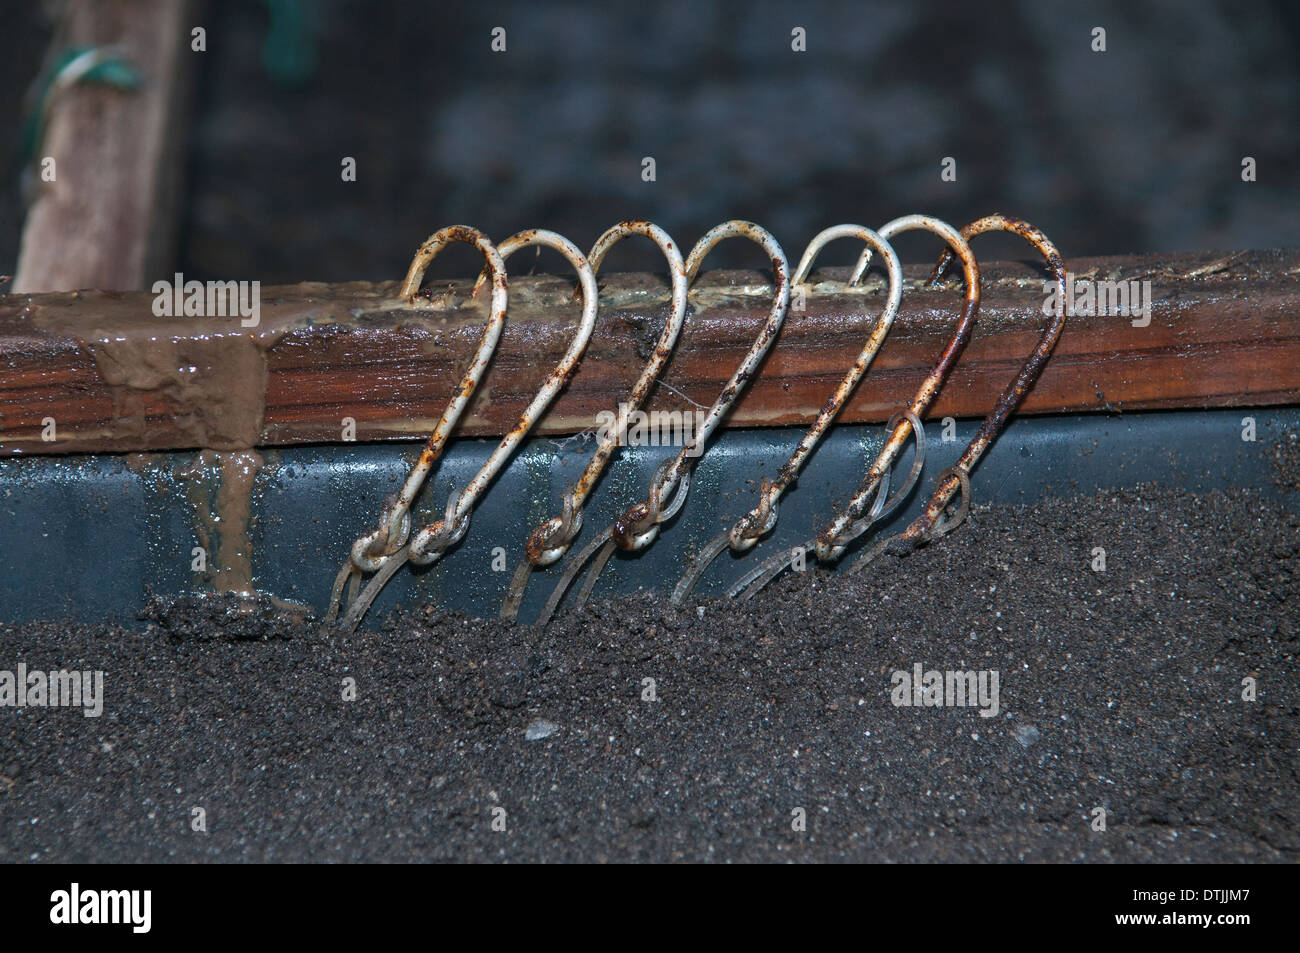 Hooks prepared for long-line fishing gear. Sao Miguel, Azores